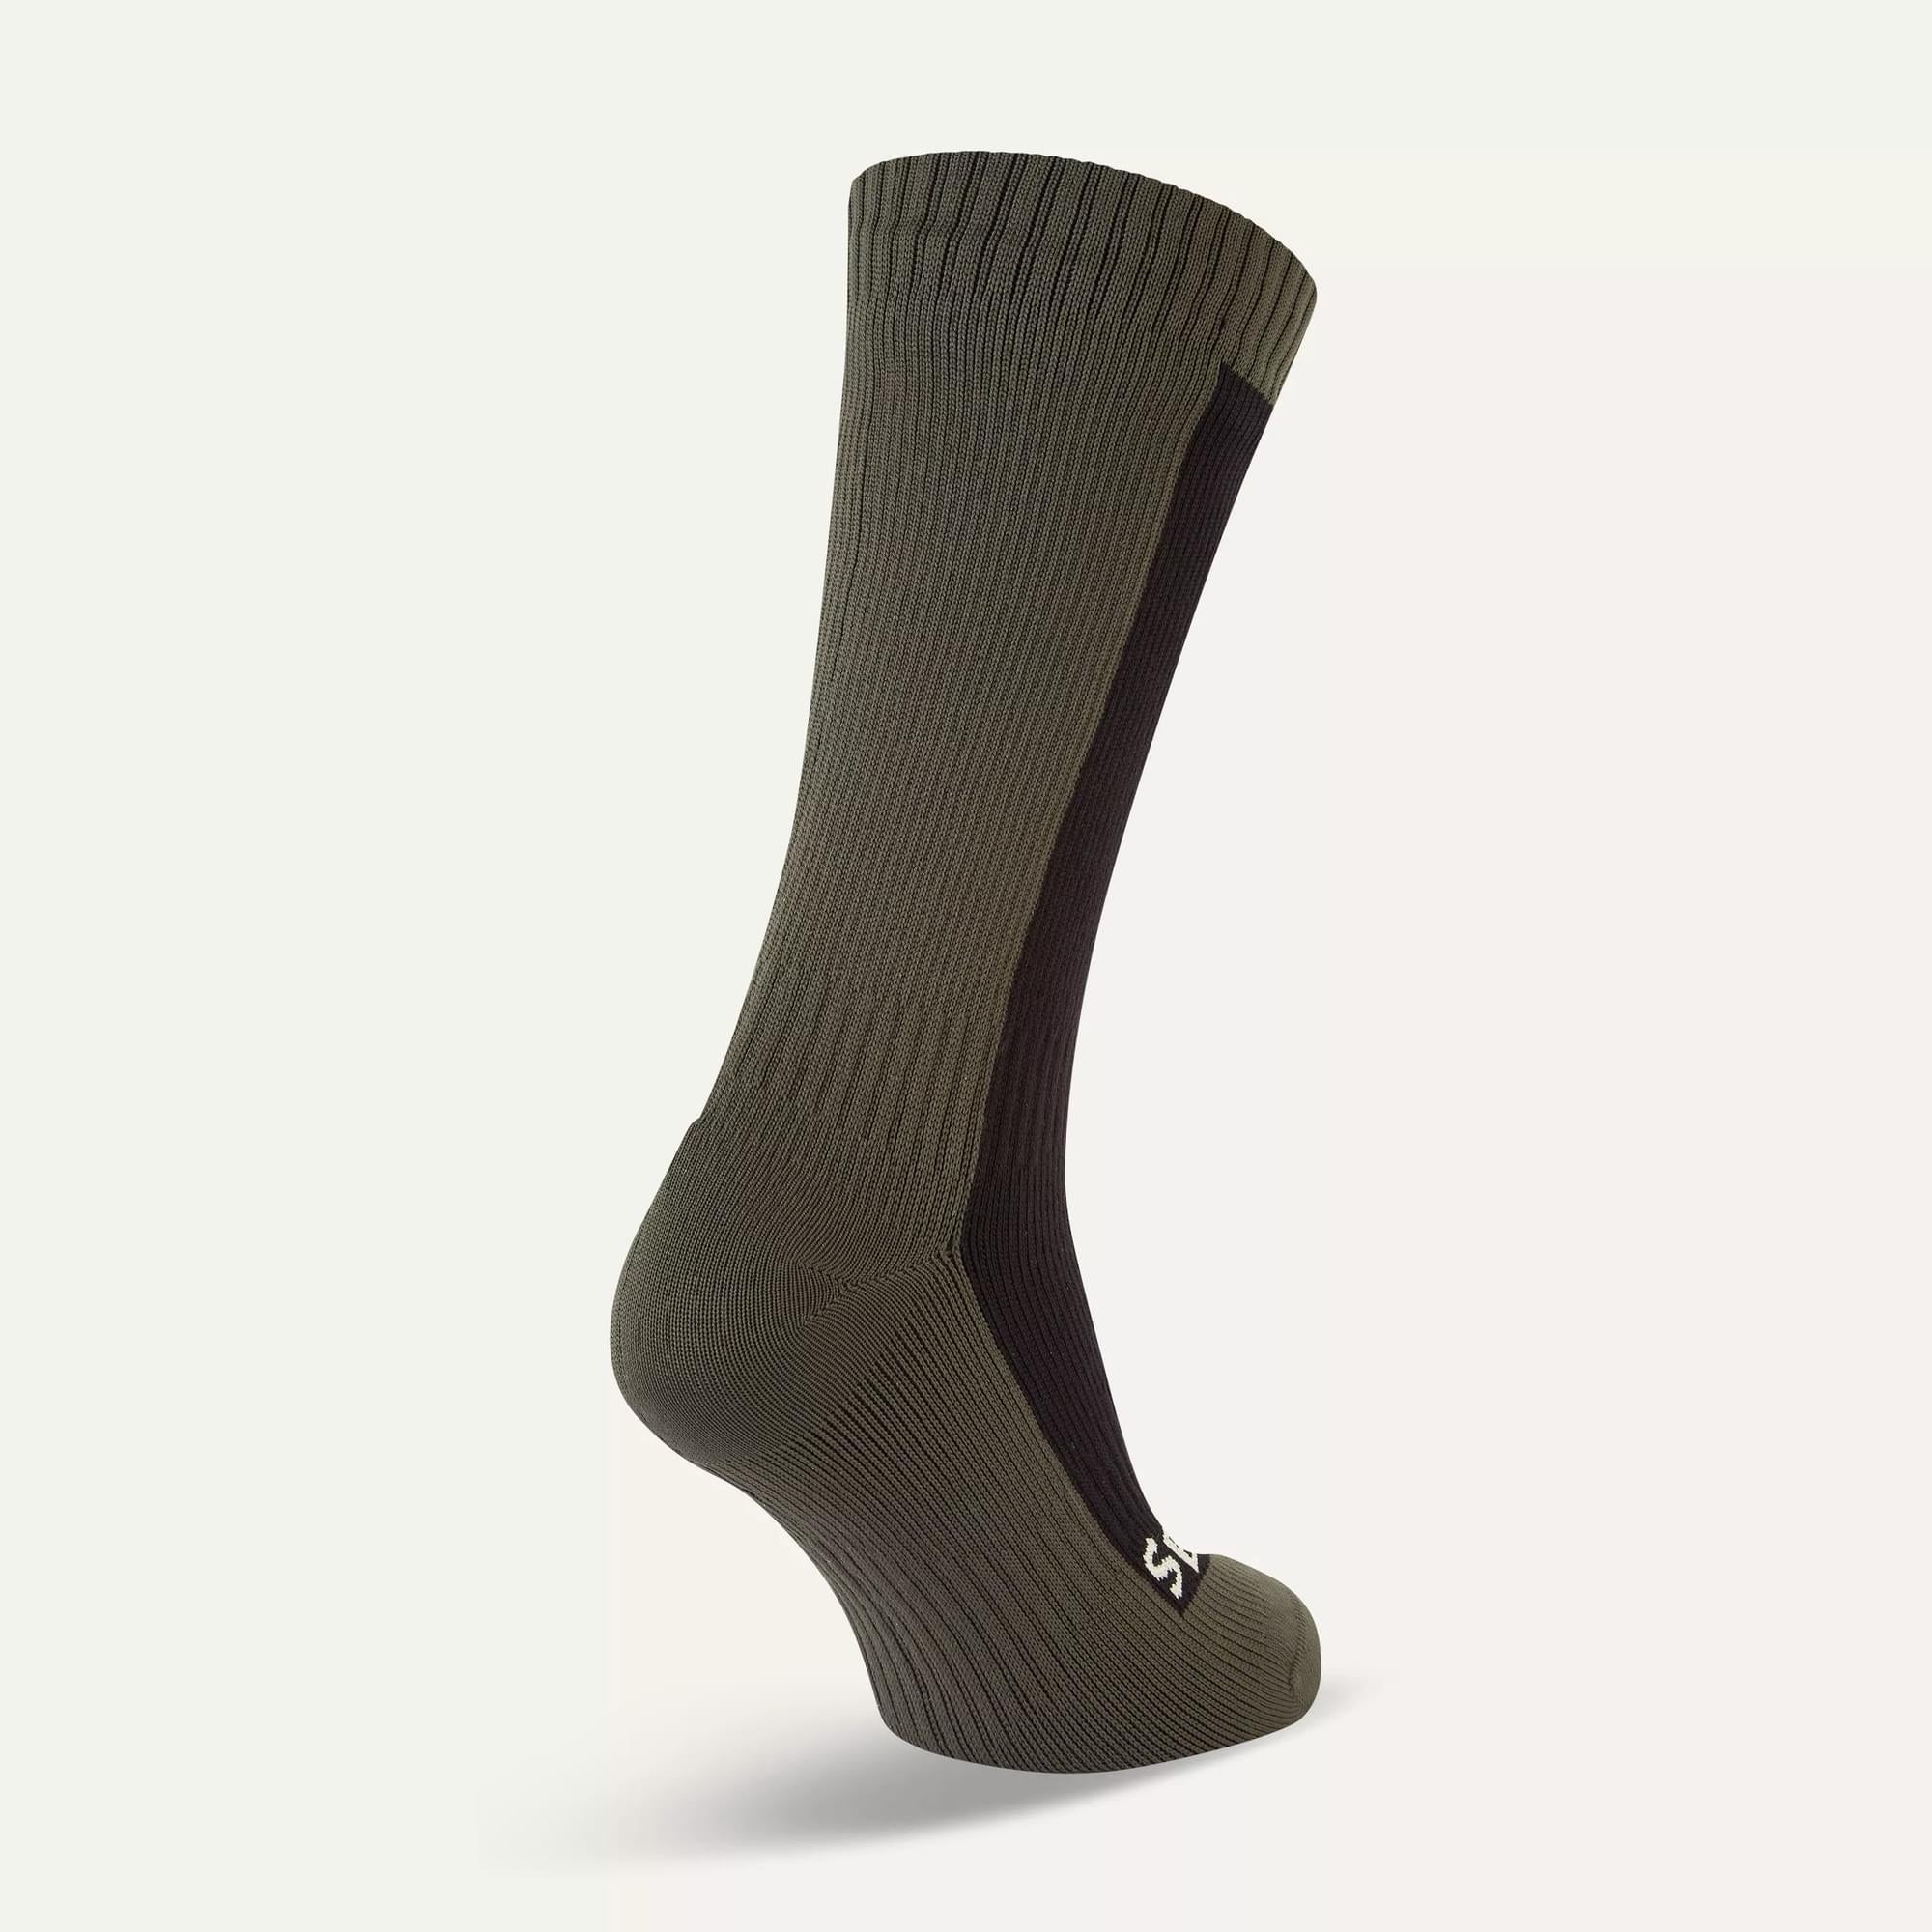 The Best Liner Socks For Hiking Keep Feet Dry, Warm + Blister-Free